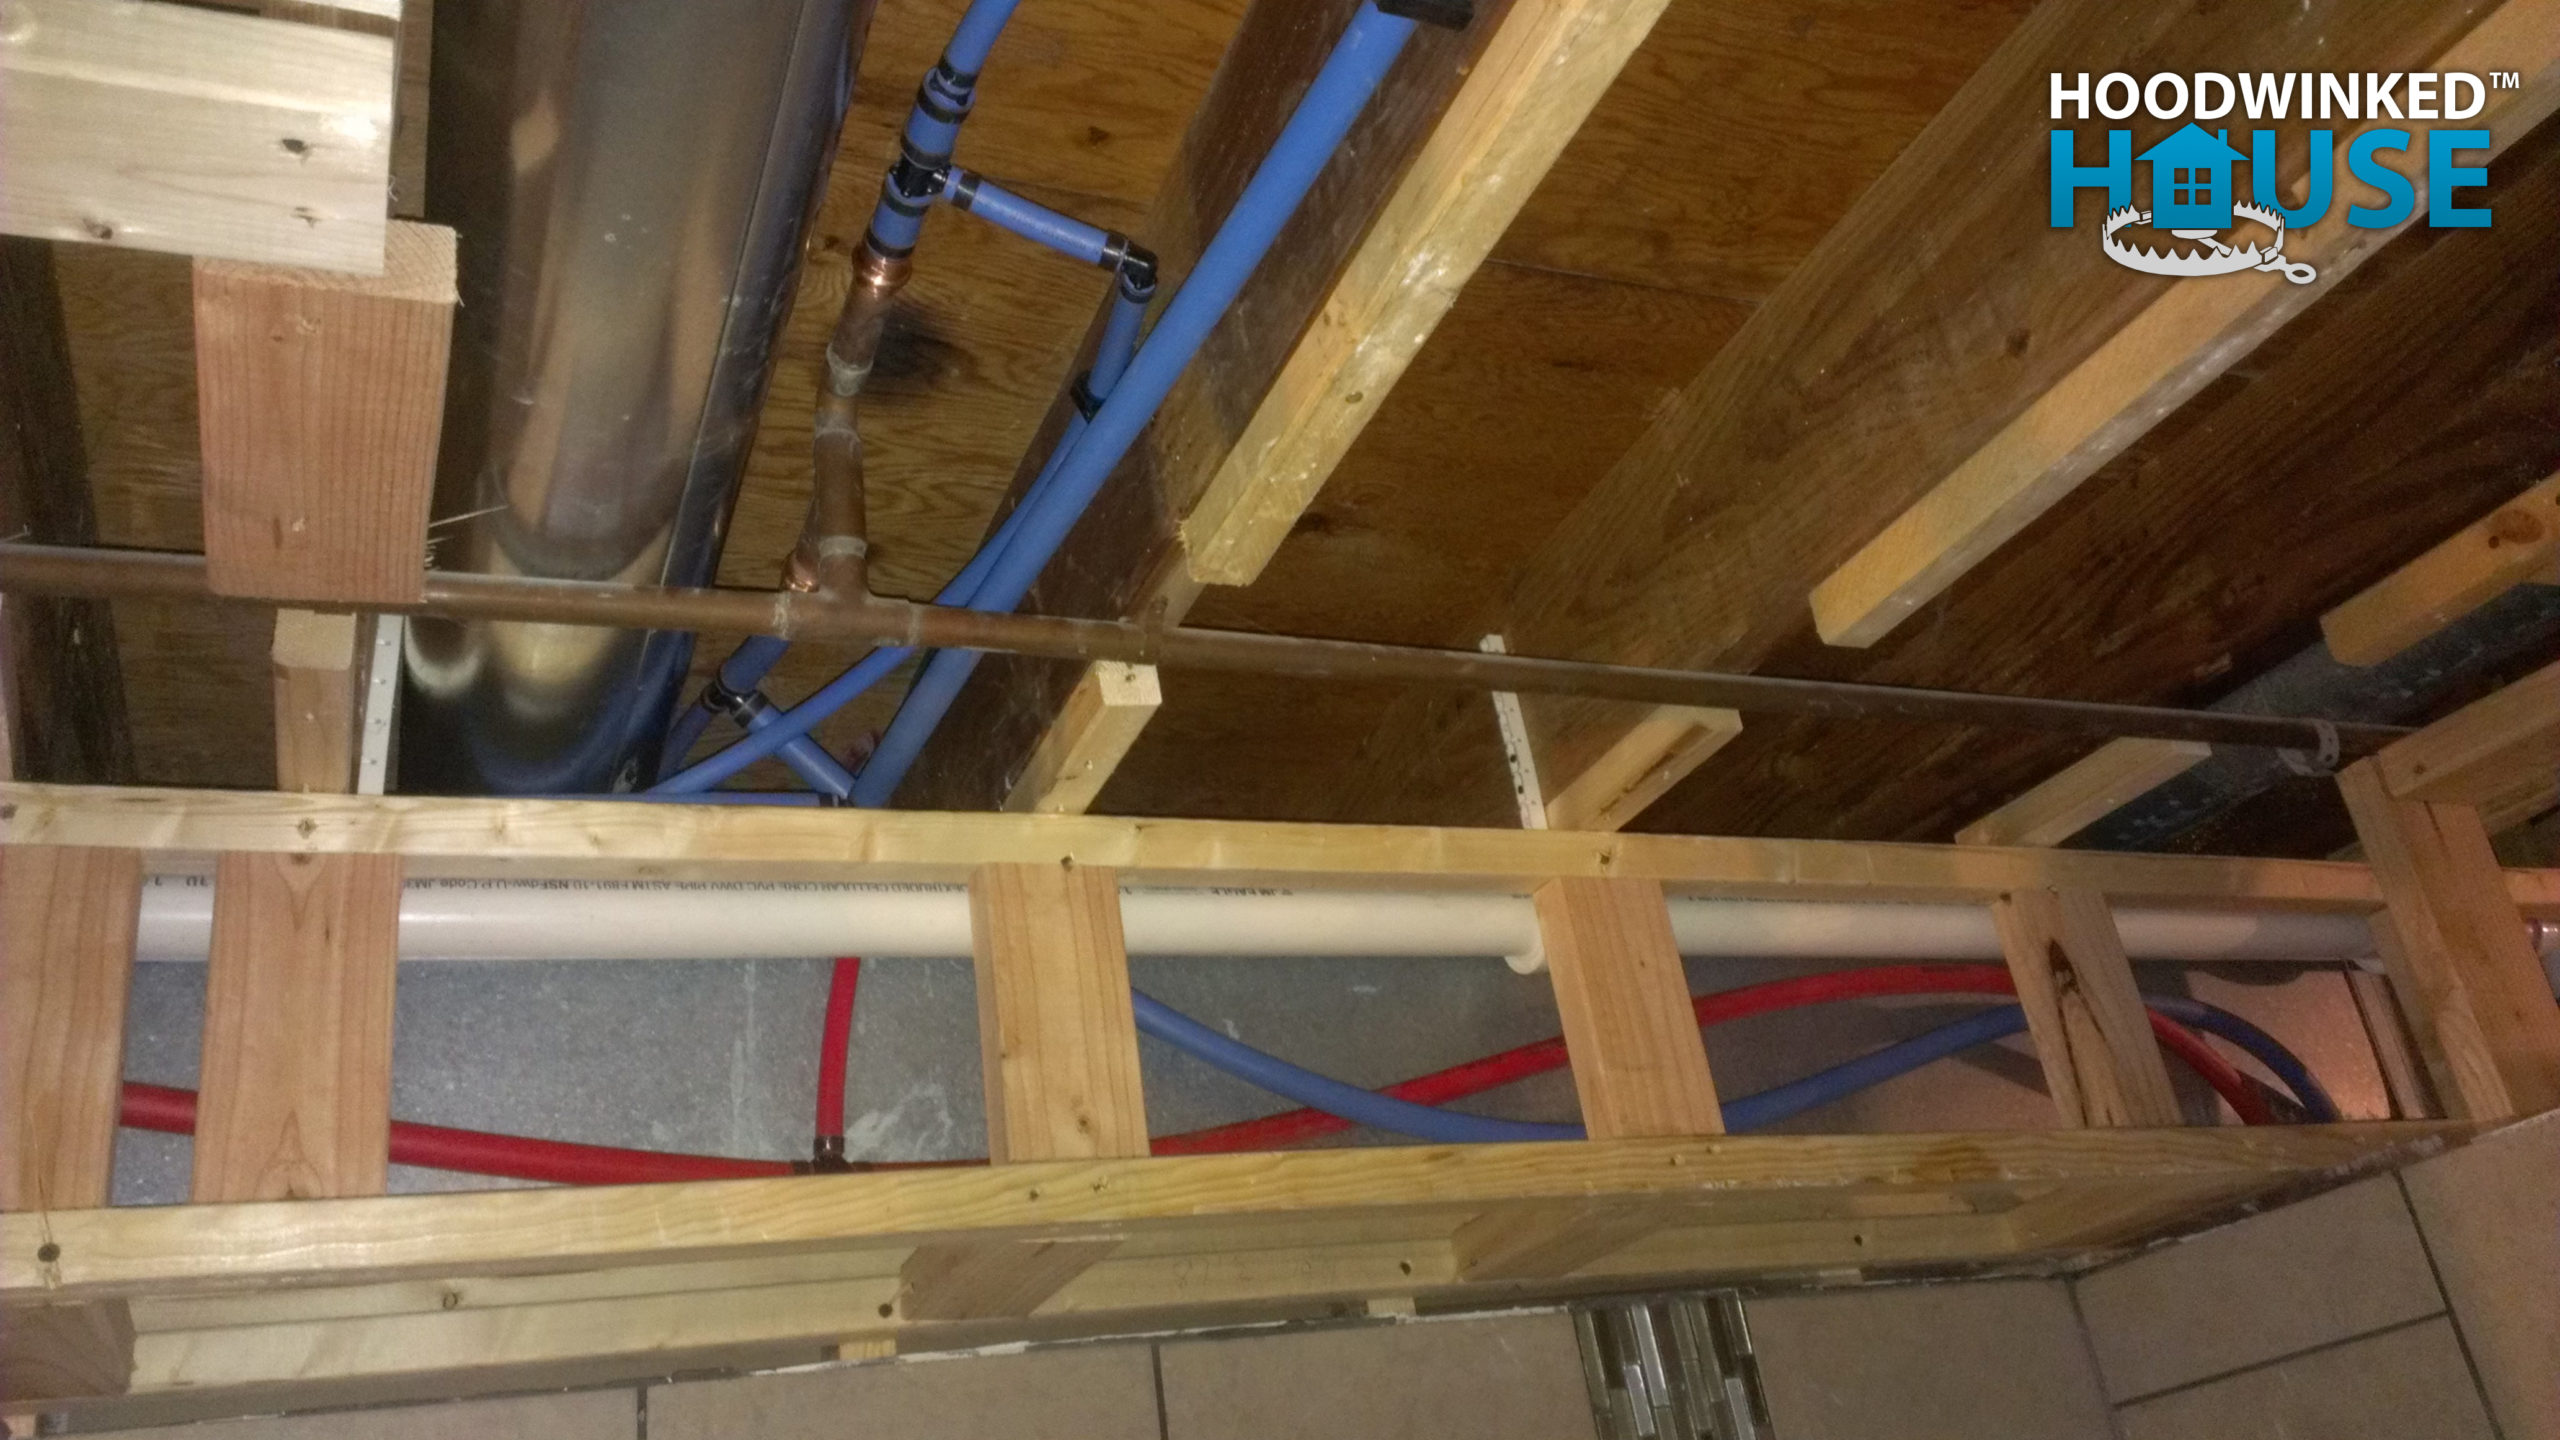 Blue and red Pex pipes interconnect with legacy copper pipes in a basement ceiling.